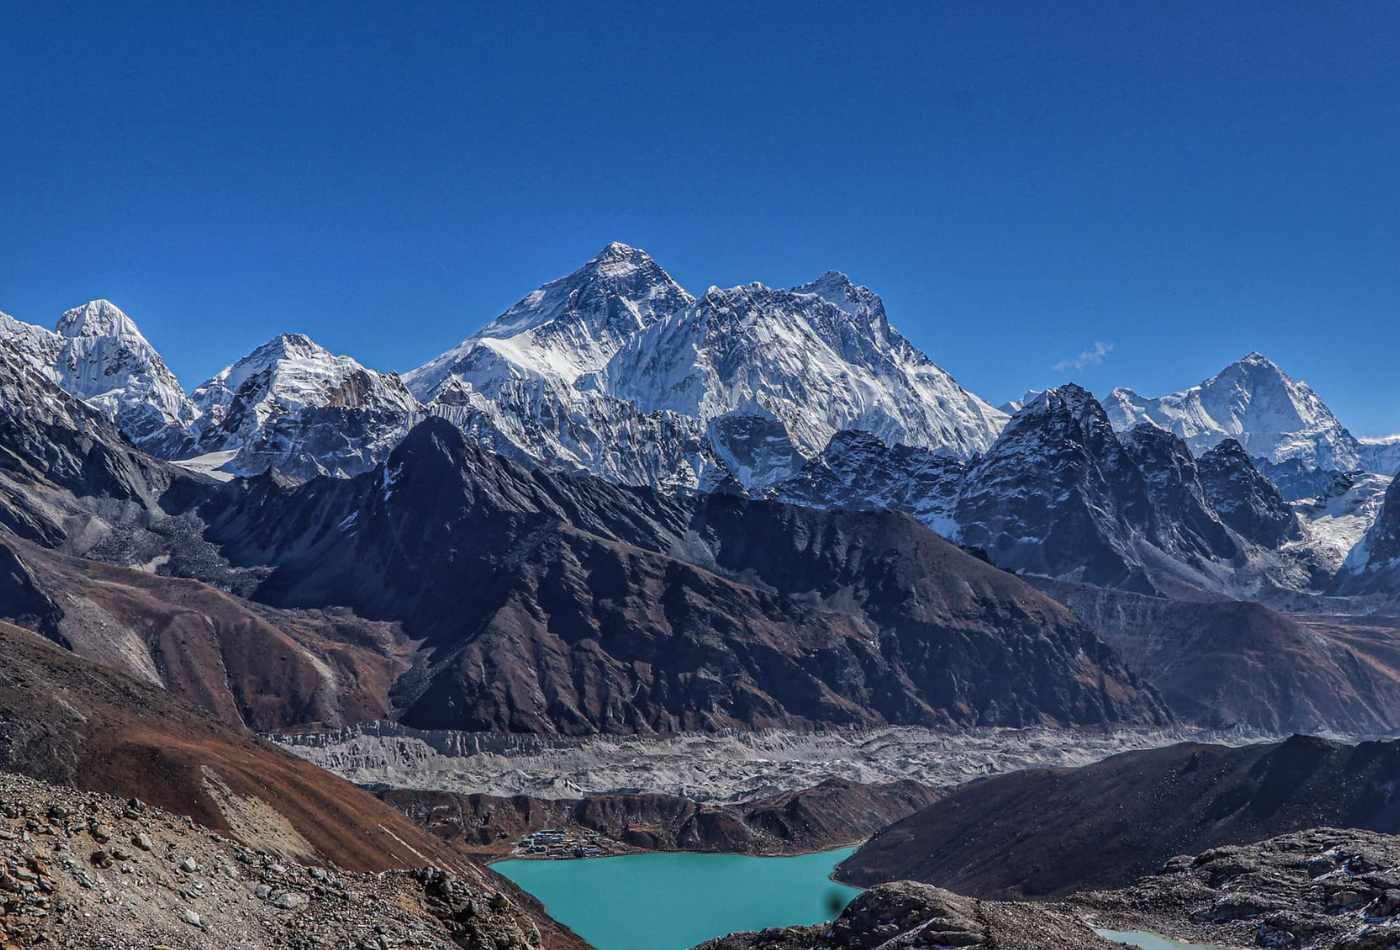 A breathtaking view of Mt. Everest and the surrounding mountain peaks, as seen from Ranjo La Pass. The snow-capped peaks rise above the clouds.